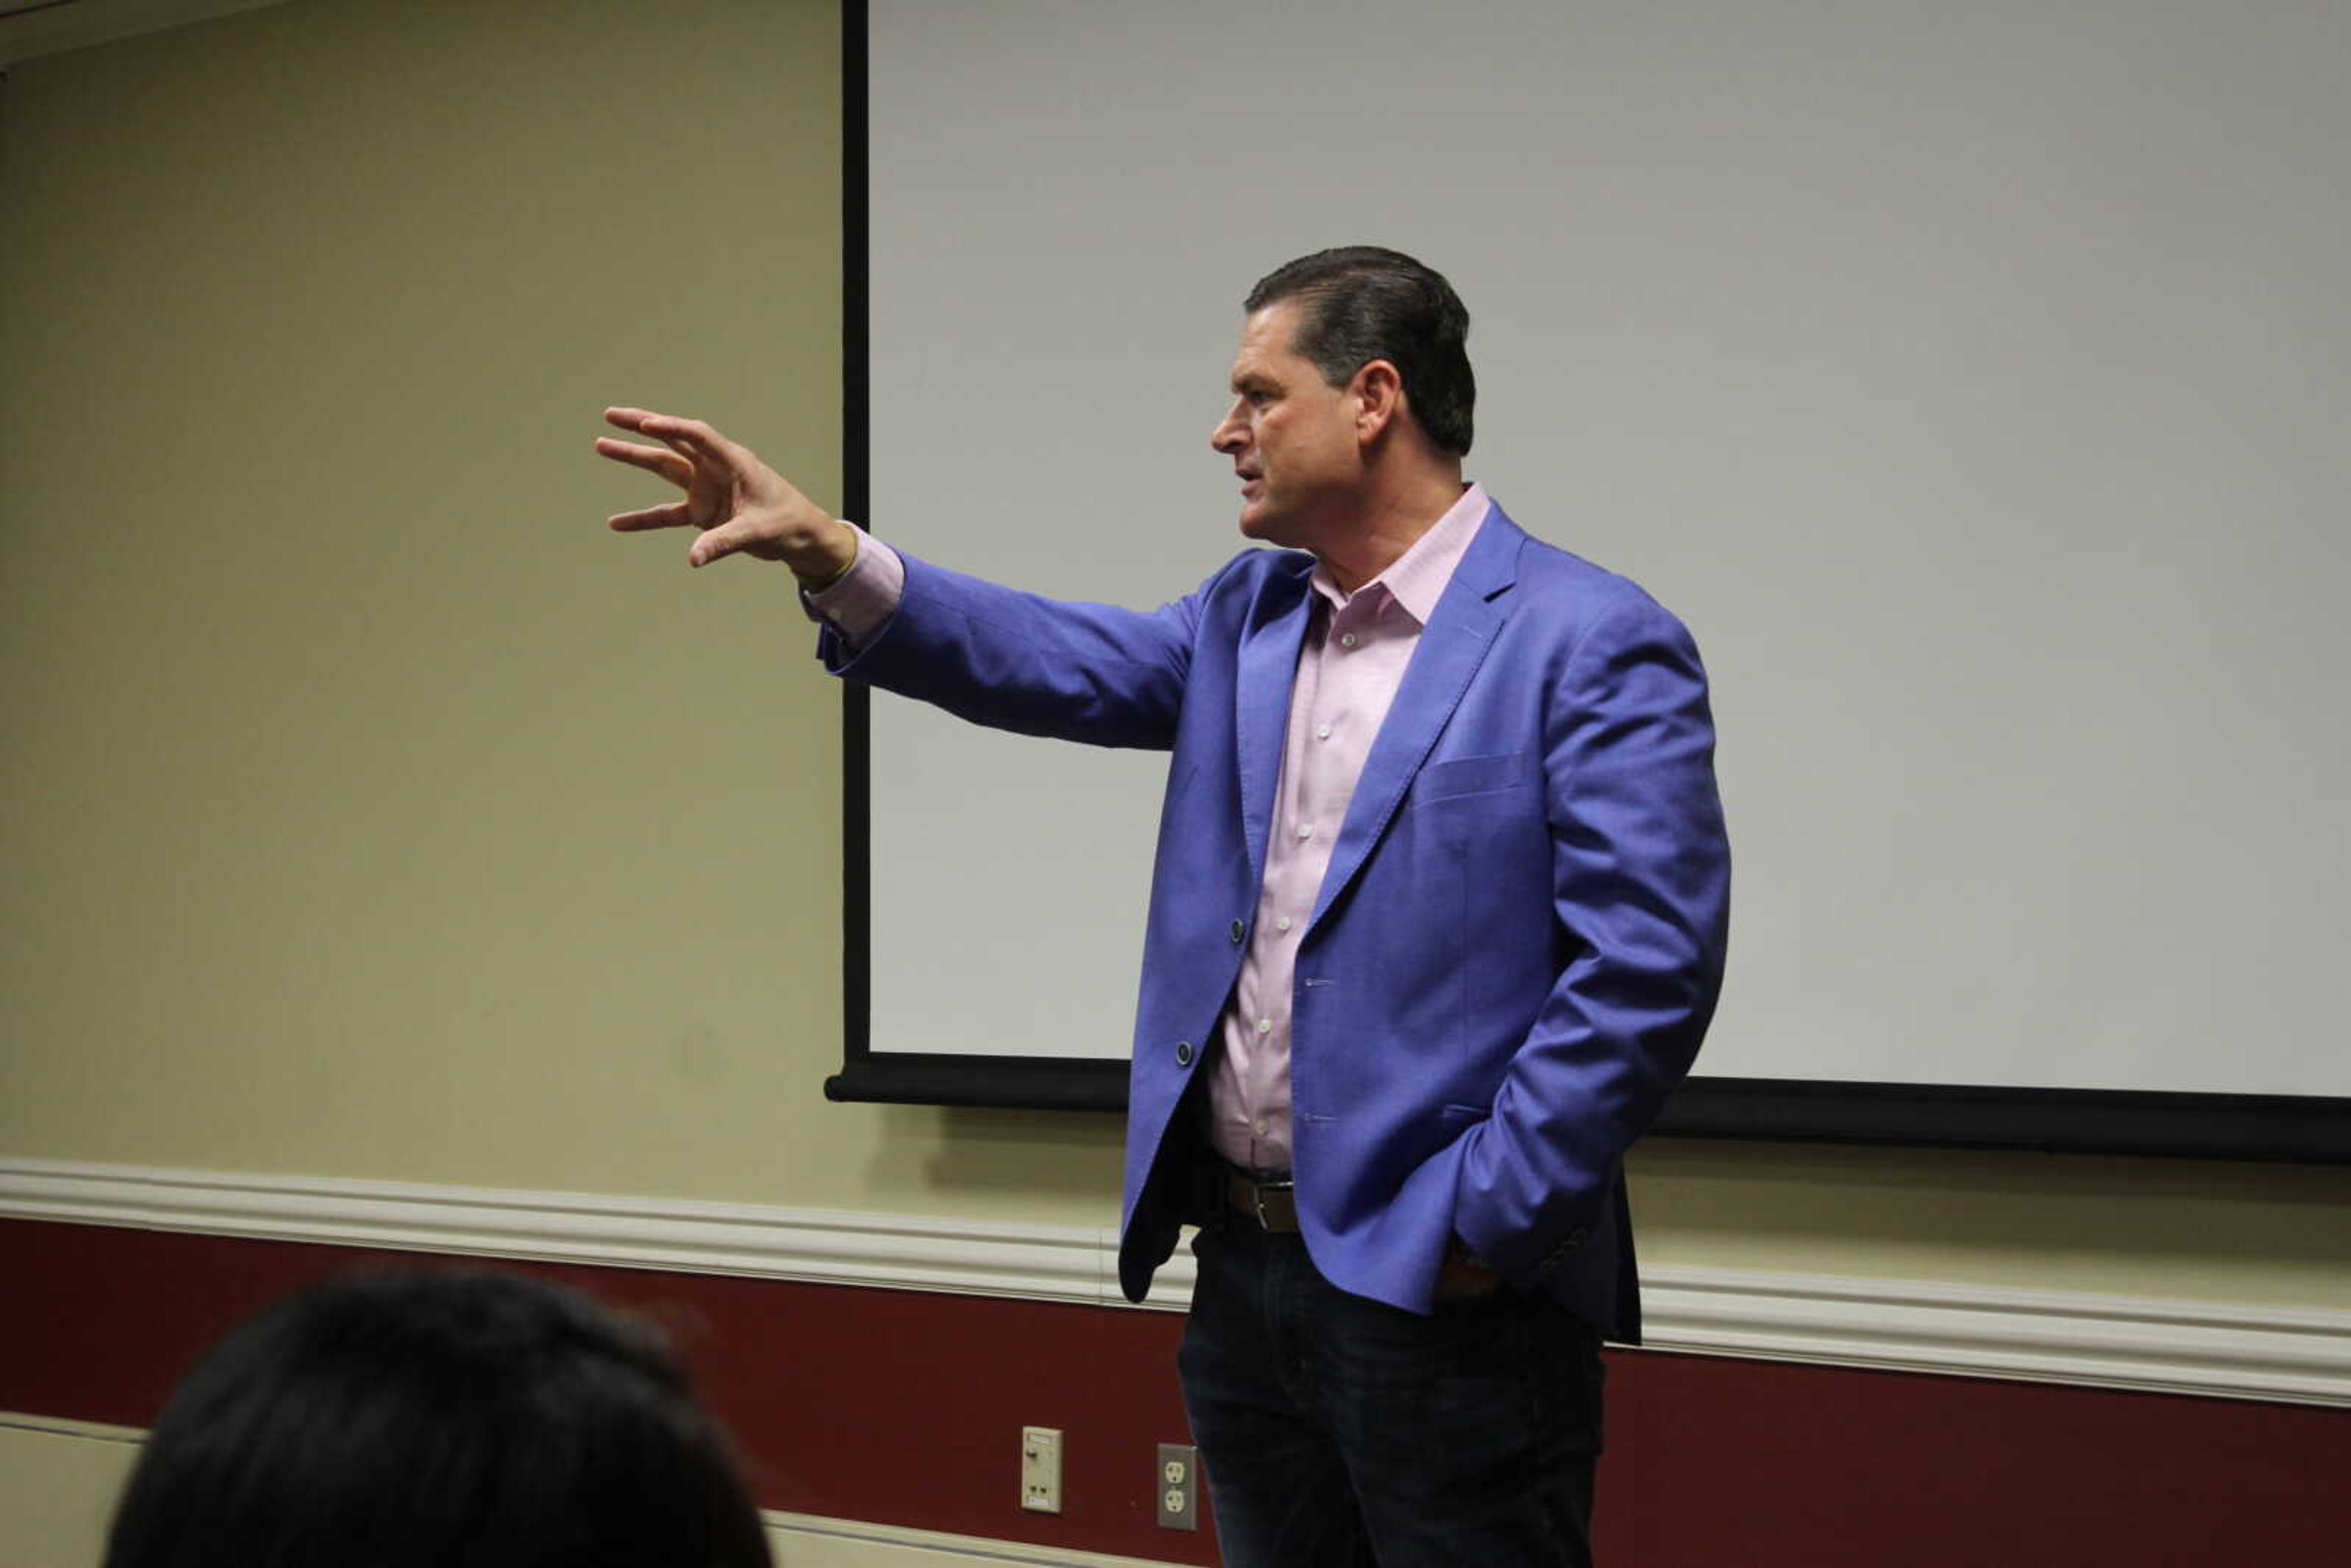 Chick-Fil-A Manager Brian House discusses how how the power of politeness has helped shape the company and his life to southeast students on Oct. 24.